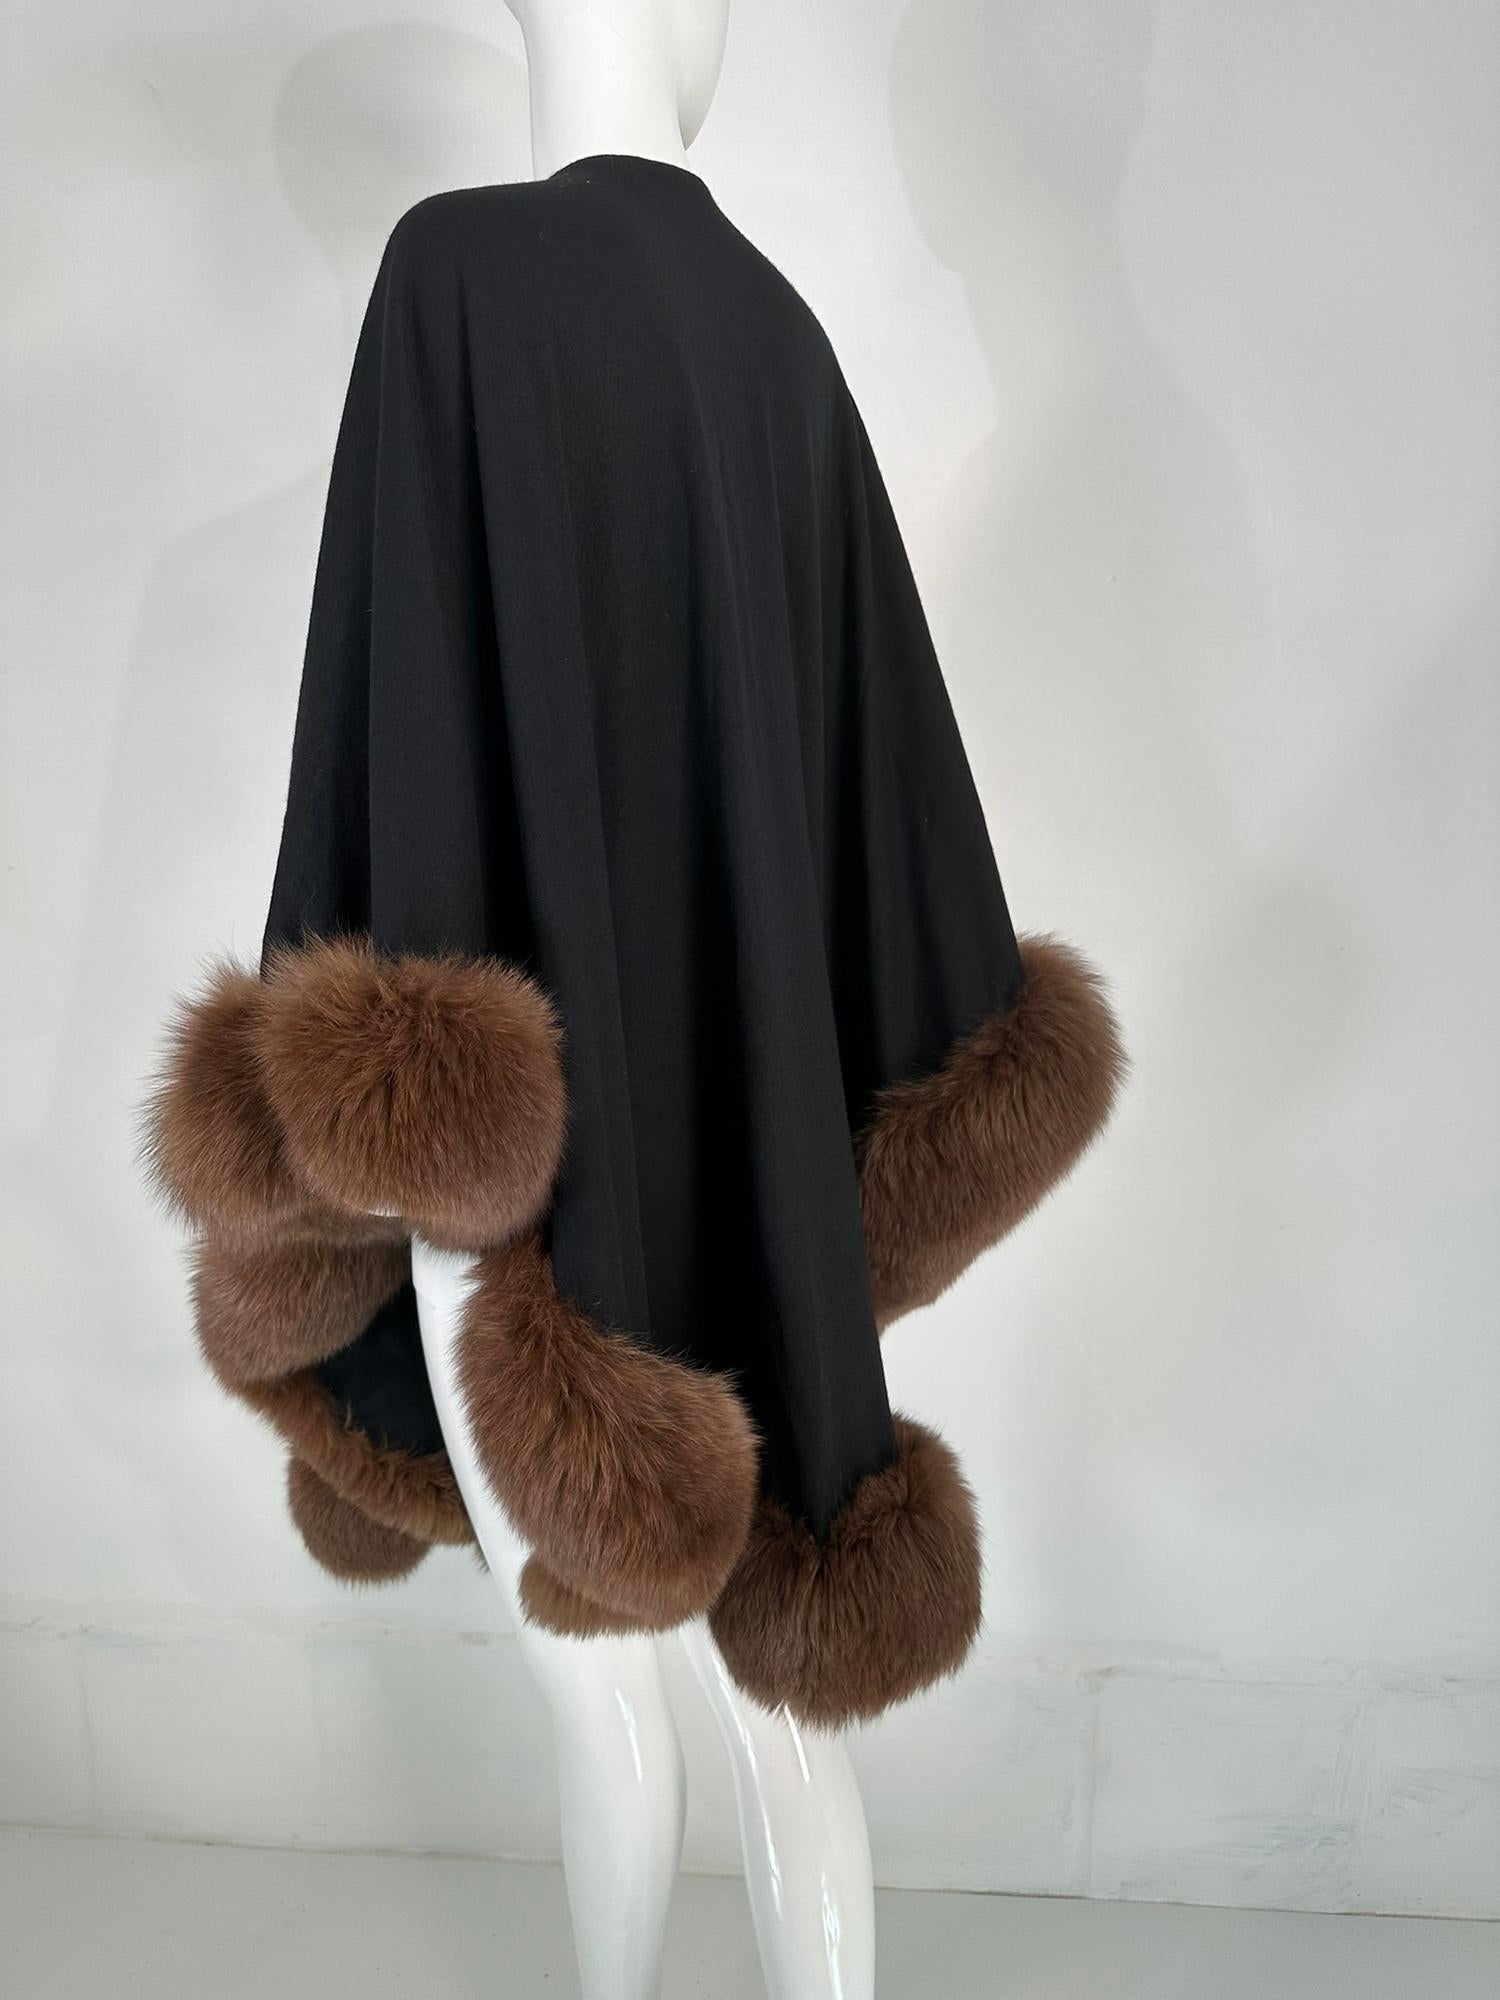 Adrienne Landau Sable Trimmed Black Wool knit Cape/Wrap From the 1990s For Sale 2